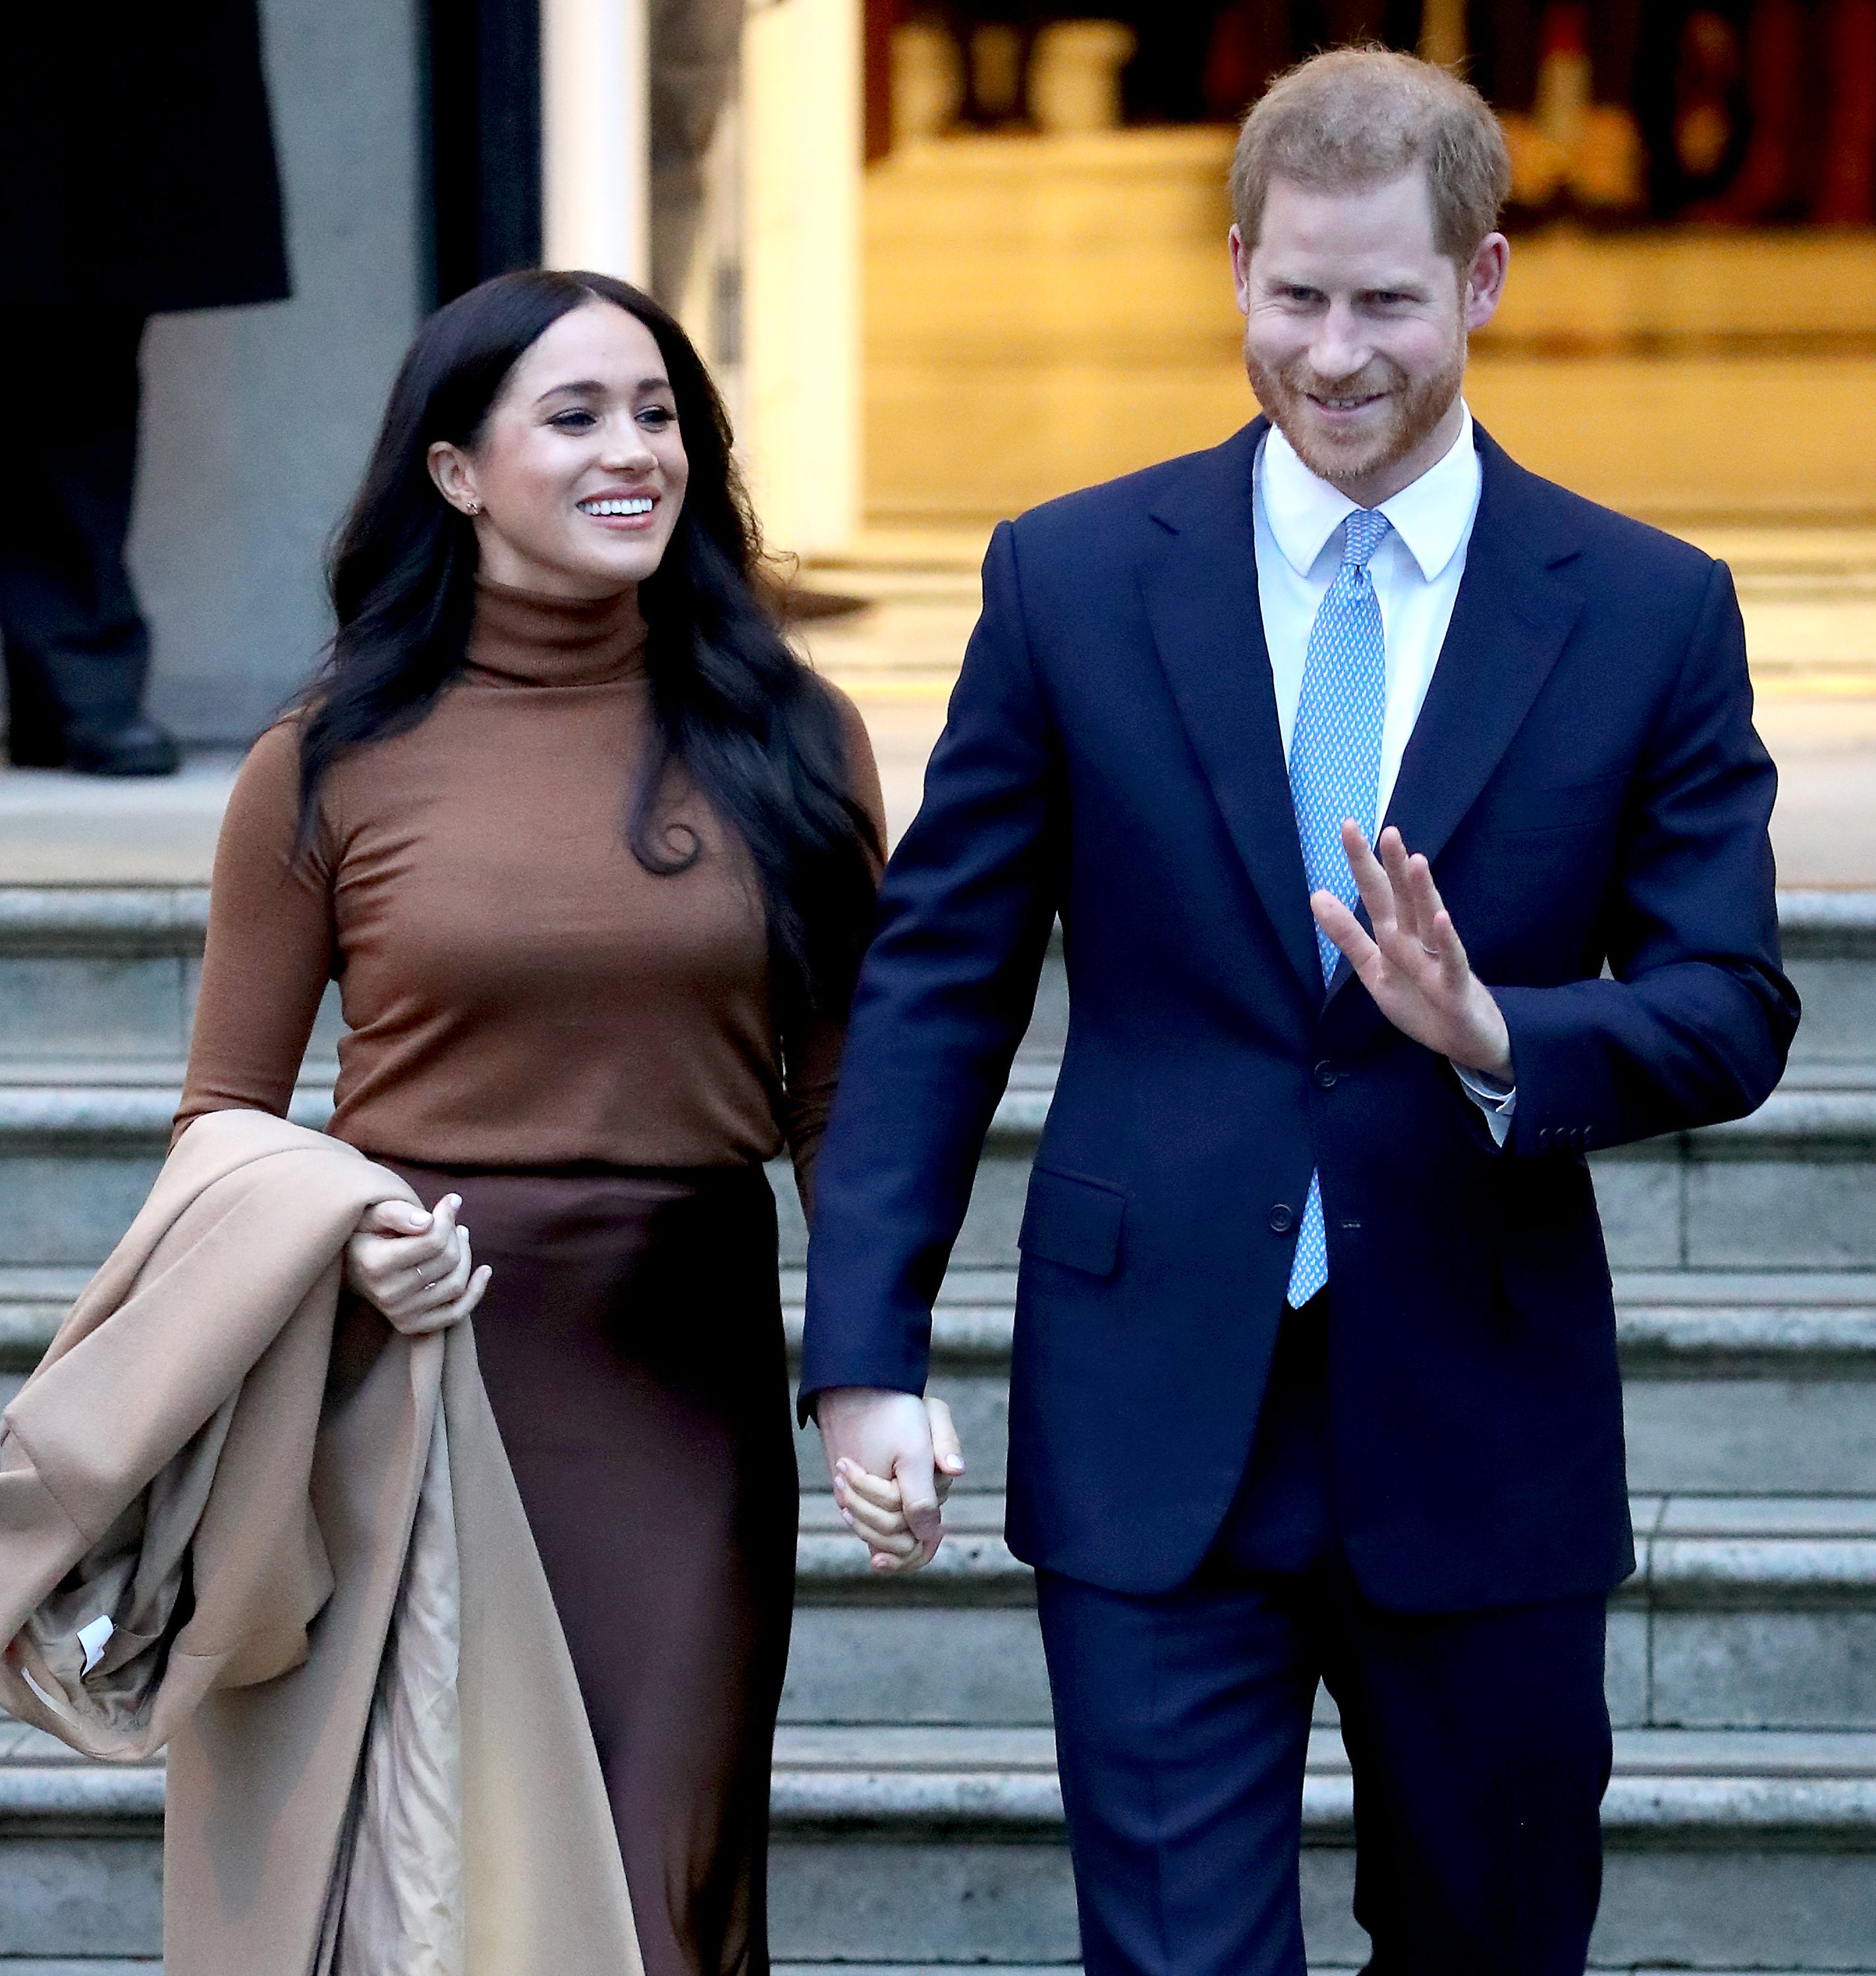 Prince Harry, Duke of Sussex and Meghan, Duchess of Sussex depart Canada House on January 07, 2020 in London, England. | Source: Getty Images